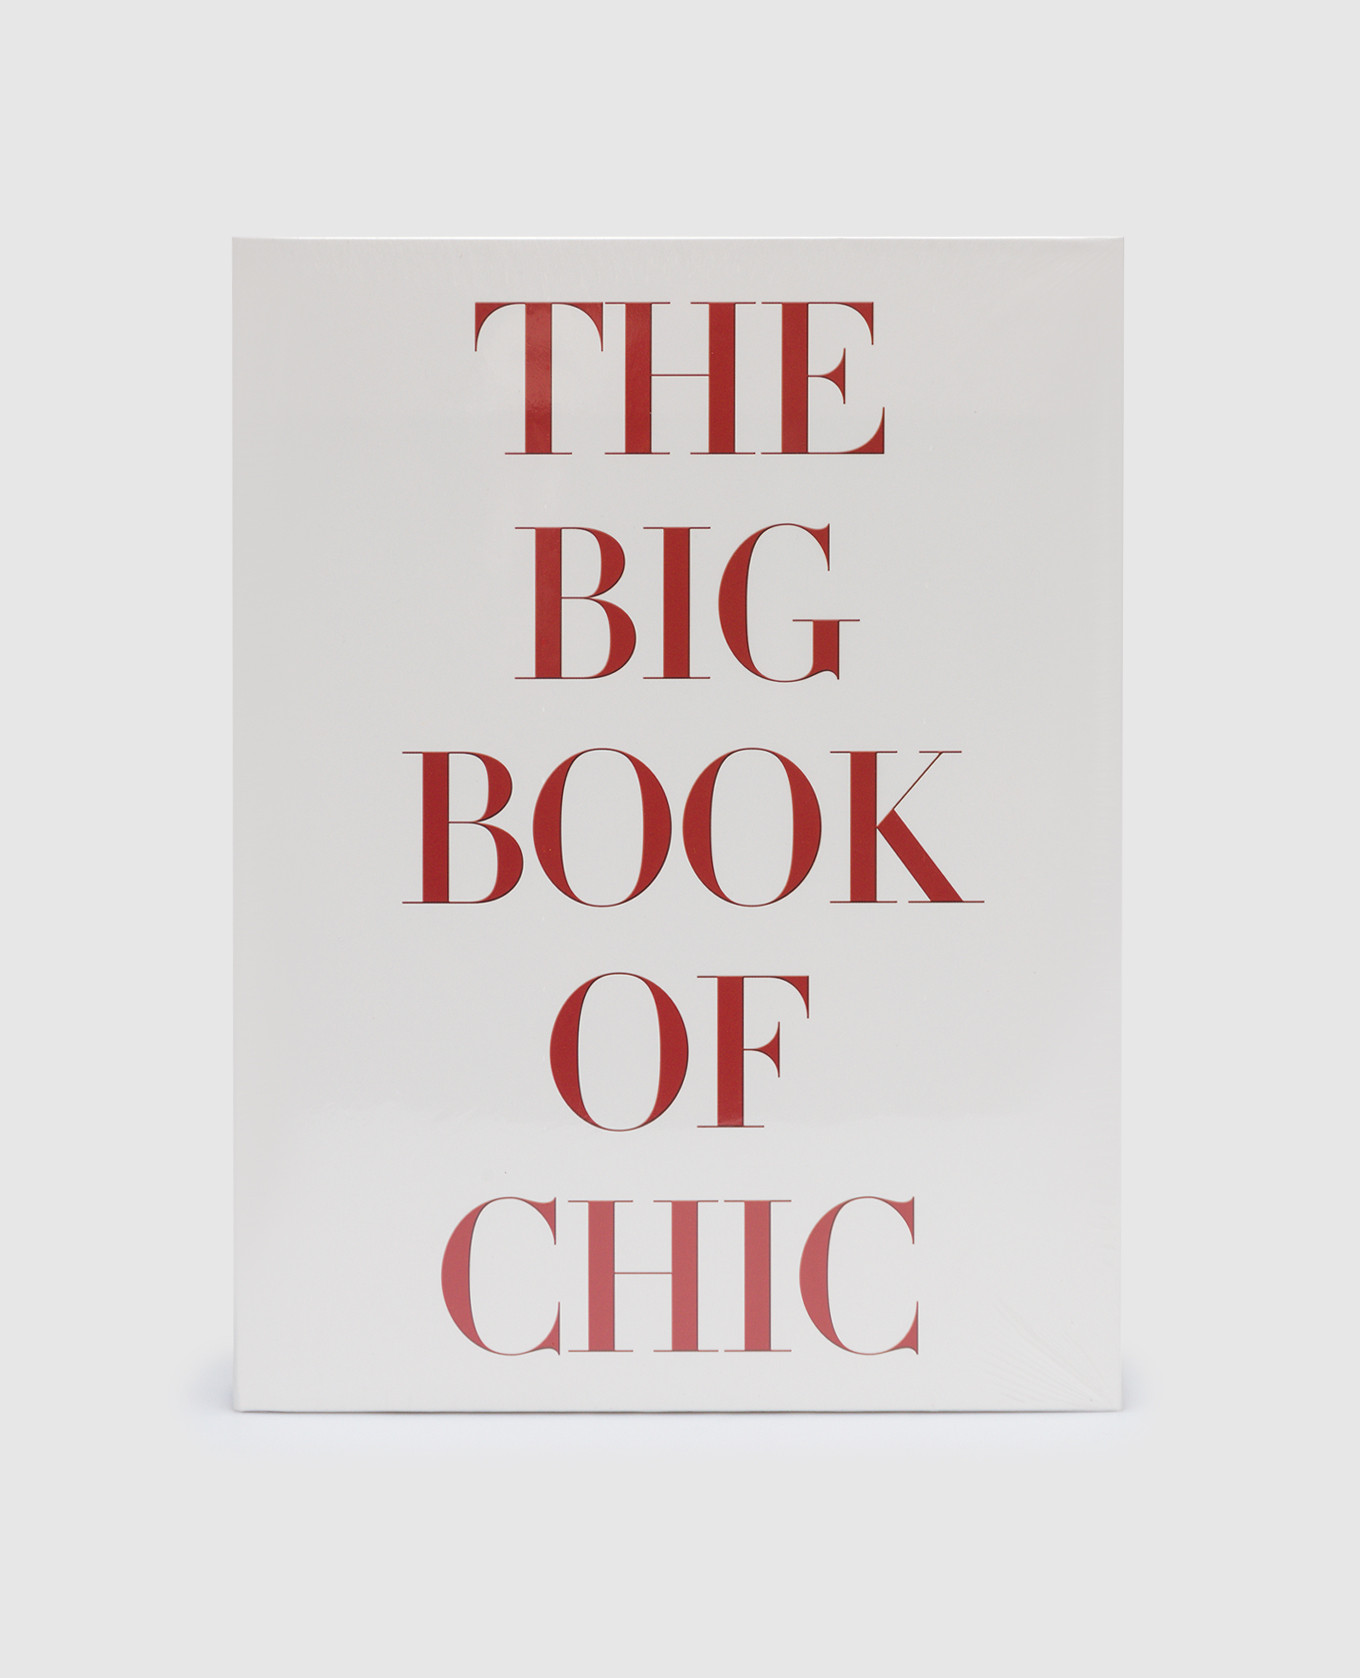 The book The Big Book of Chic